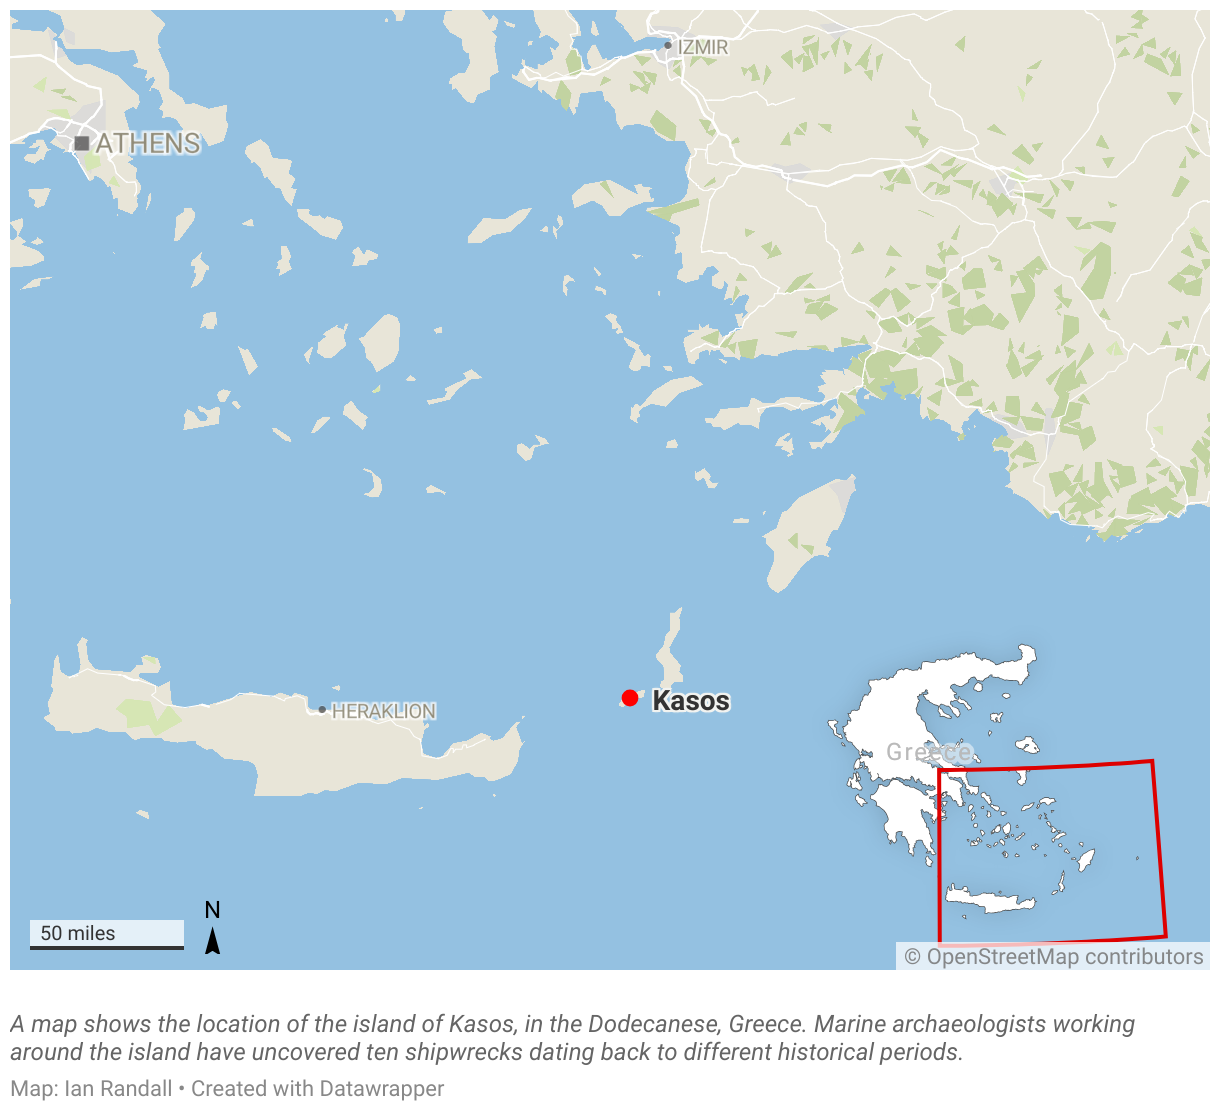 A map shows the location of the island of Kasos, in the Dodecanese, Greece.